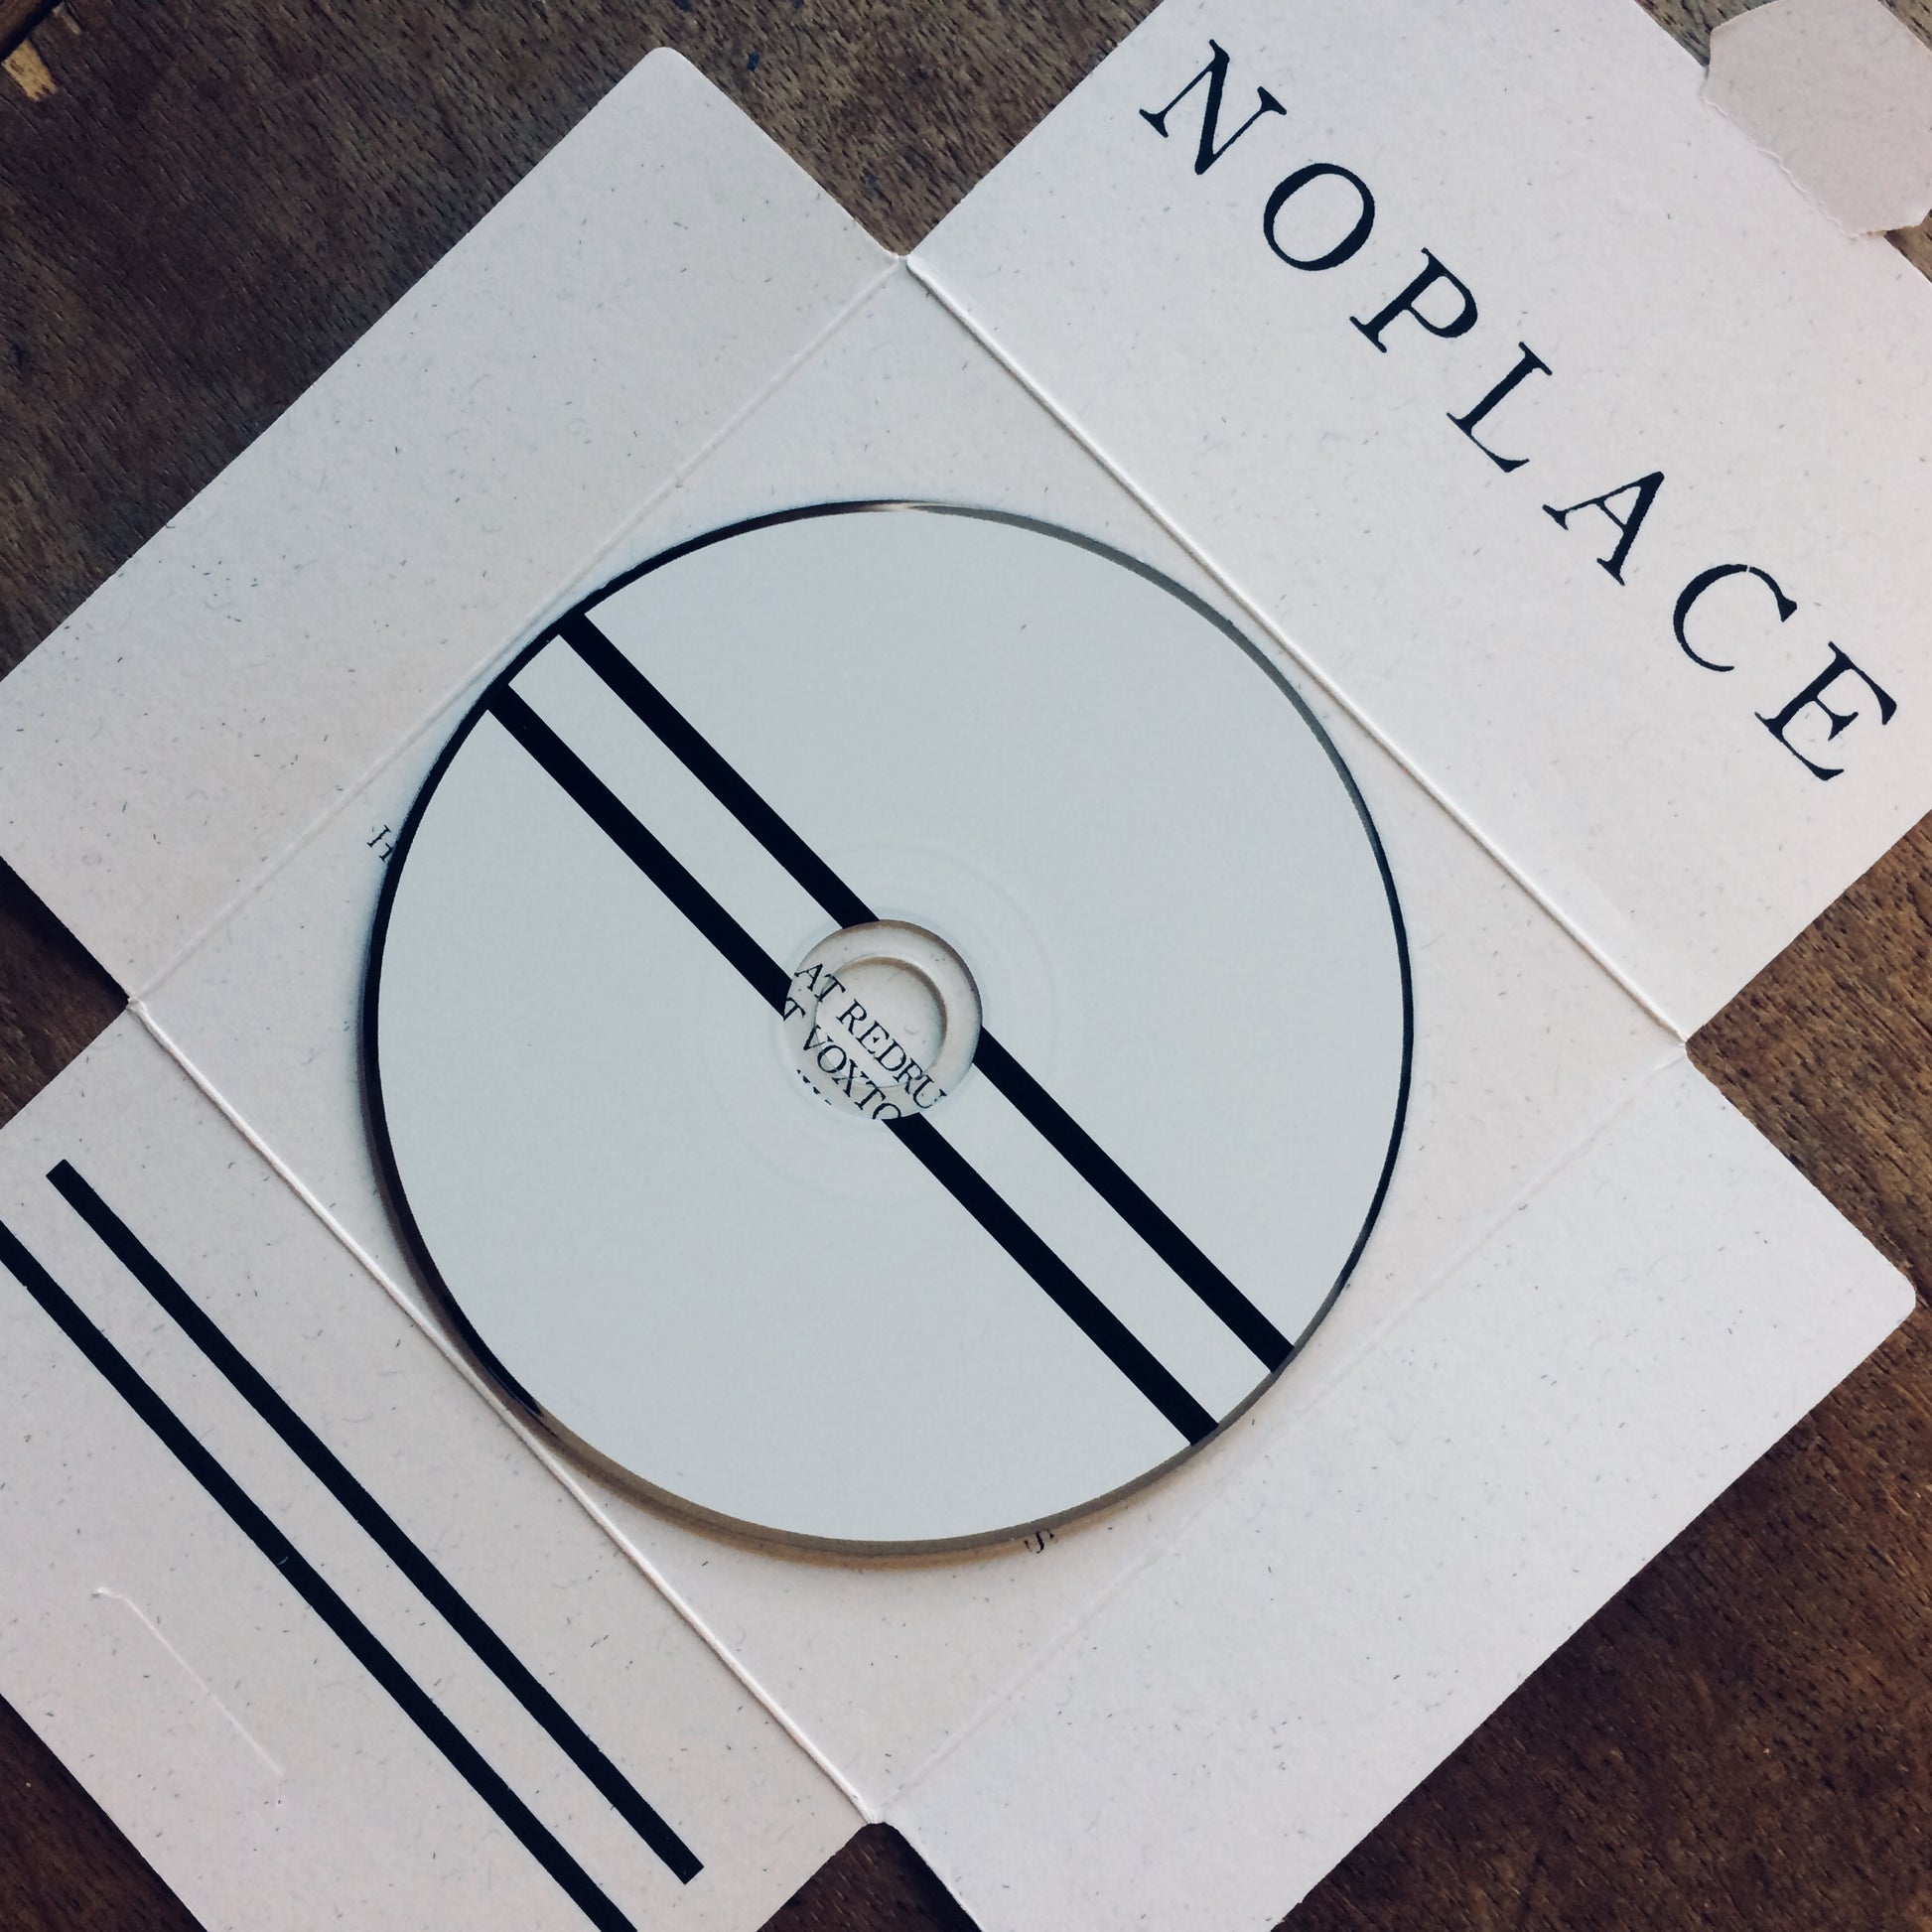 Baker / Goff / Harris - Noplace | Gizeh Records | Packaging by SmilingPaperGhosts